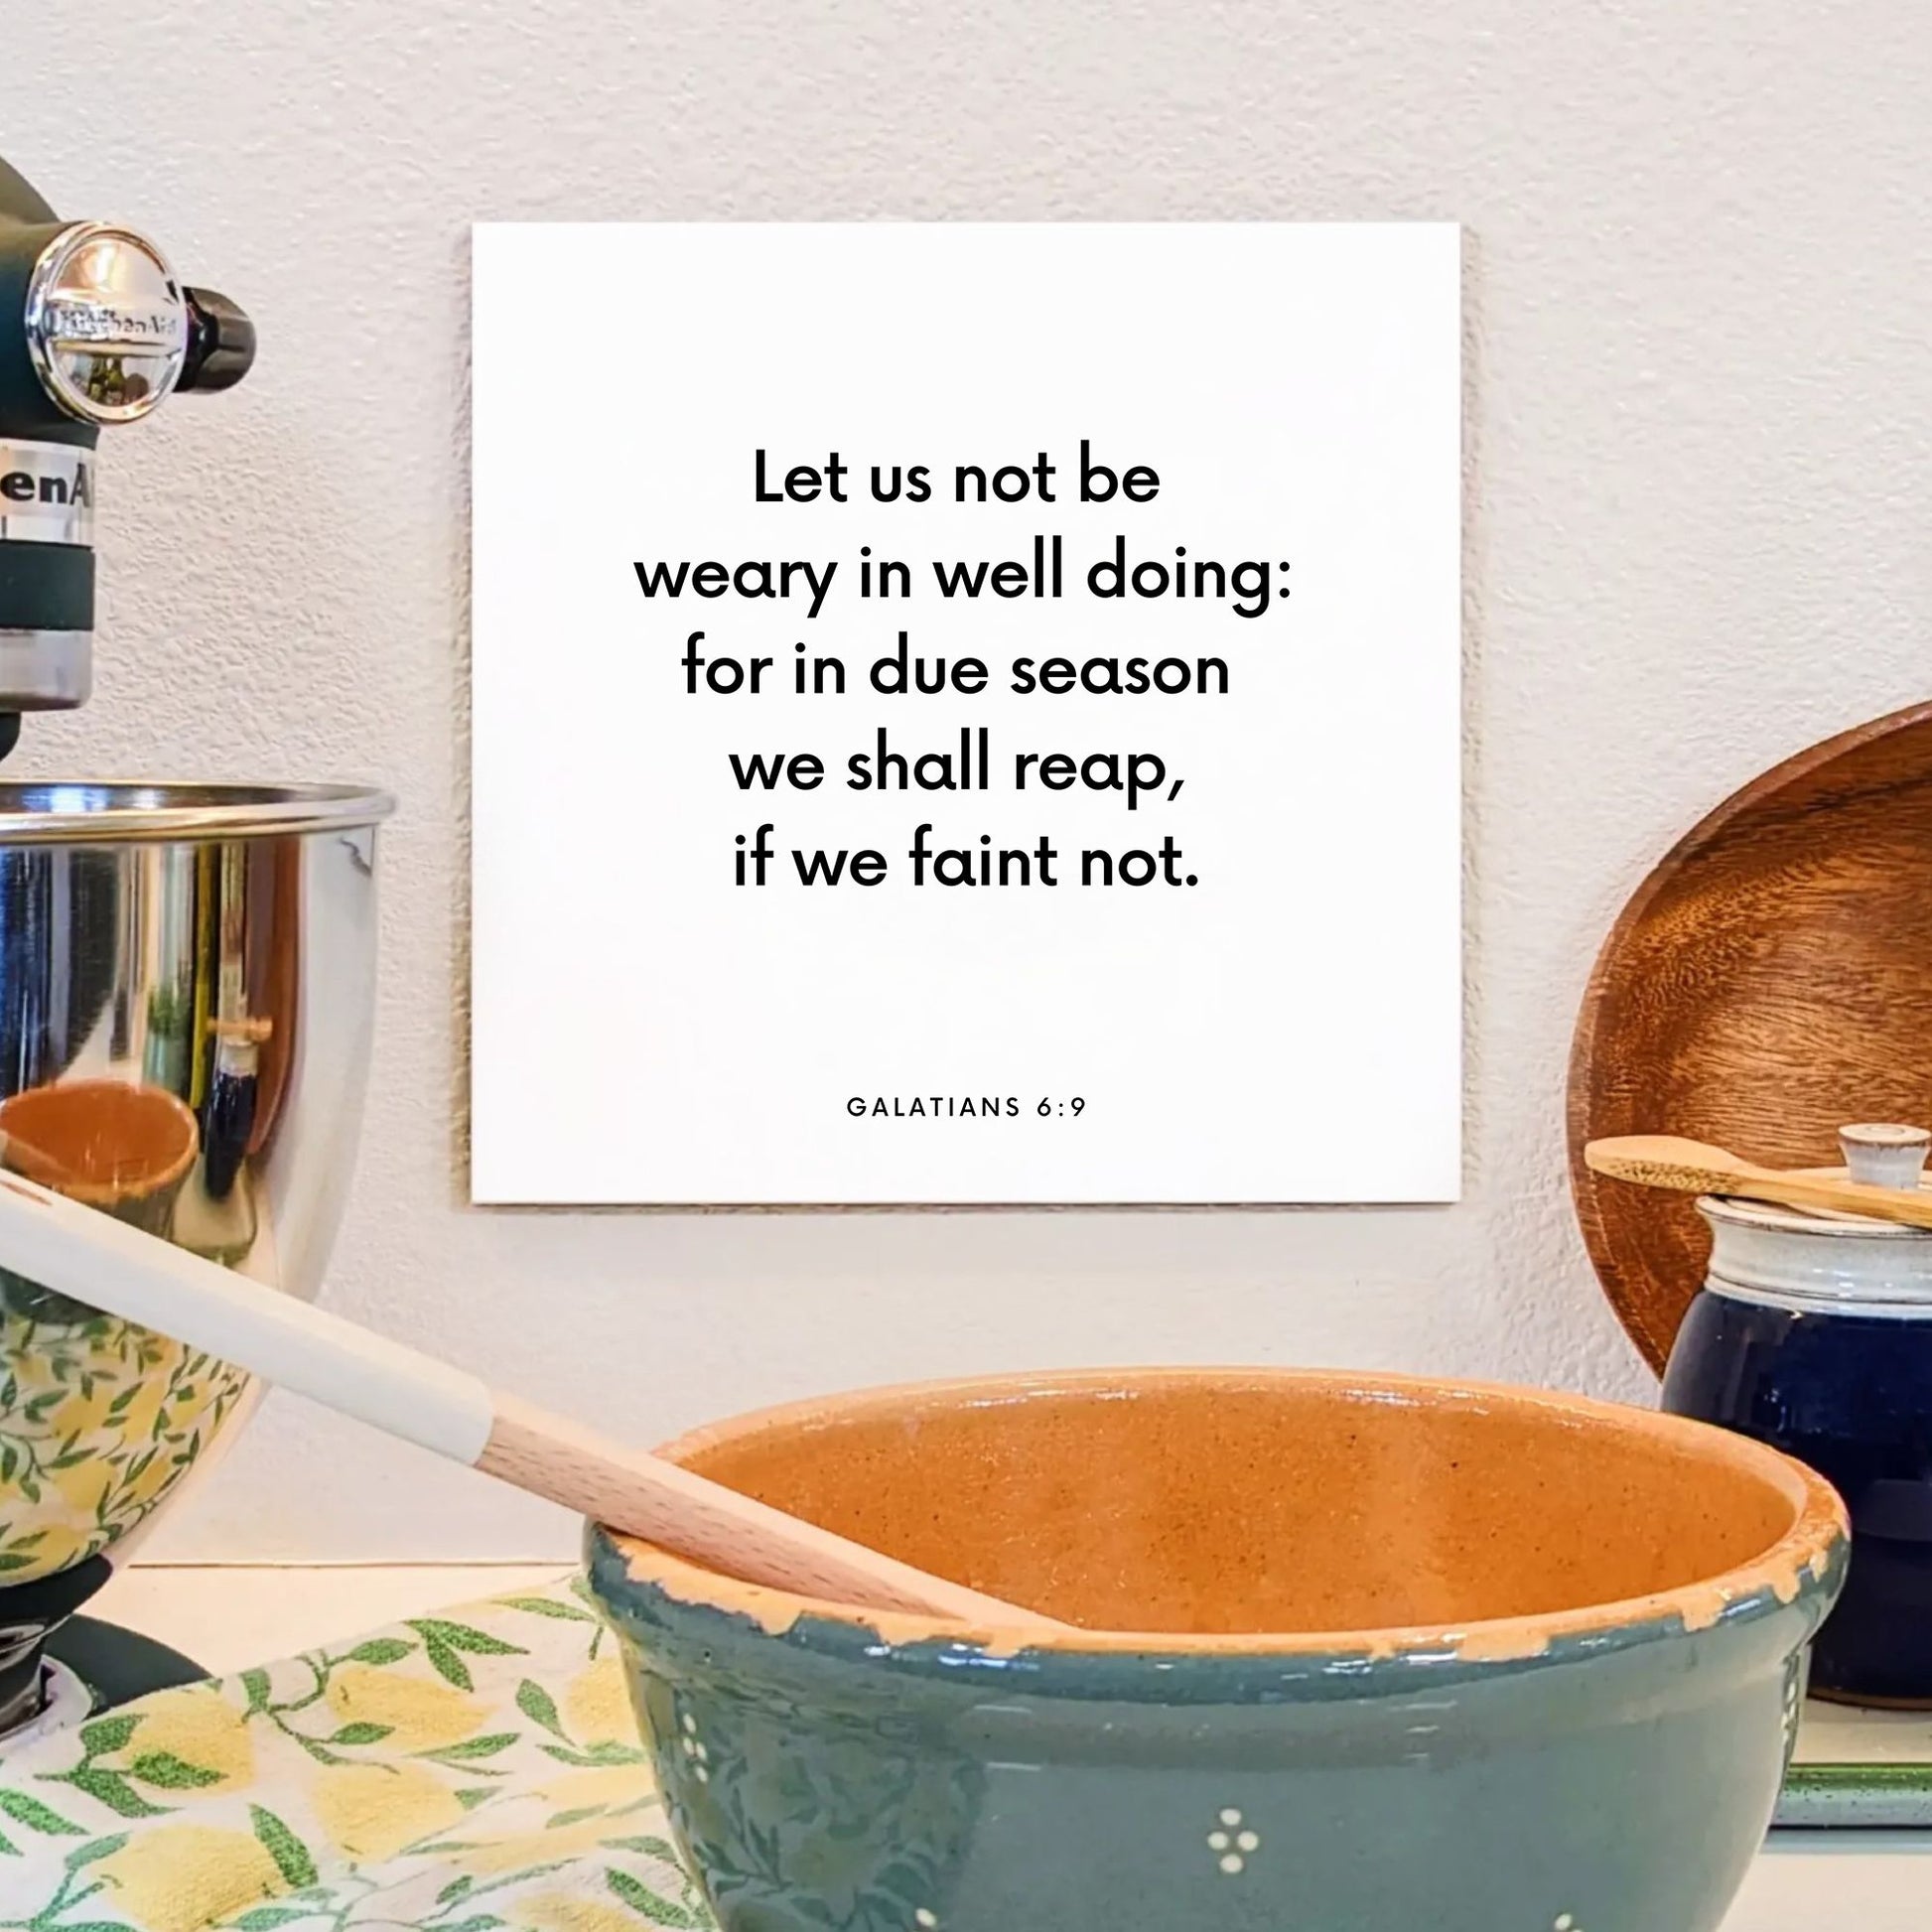 Kitchen mouting of the scripture tile for Galatians 6:9 - "Let us not be weary in well doing"